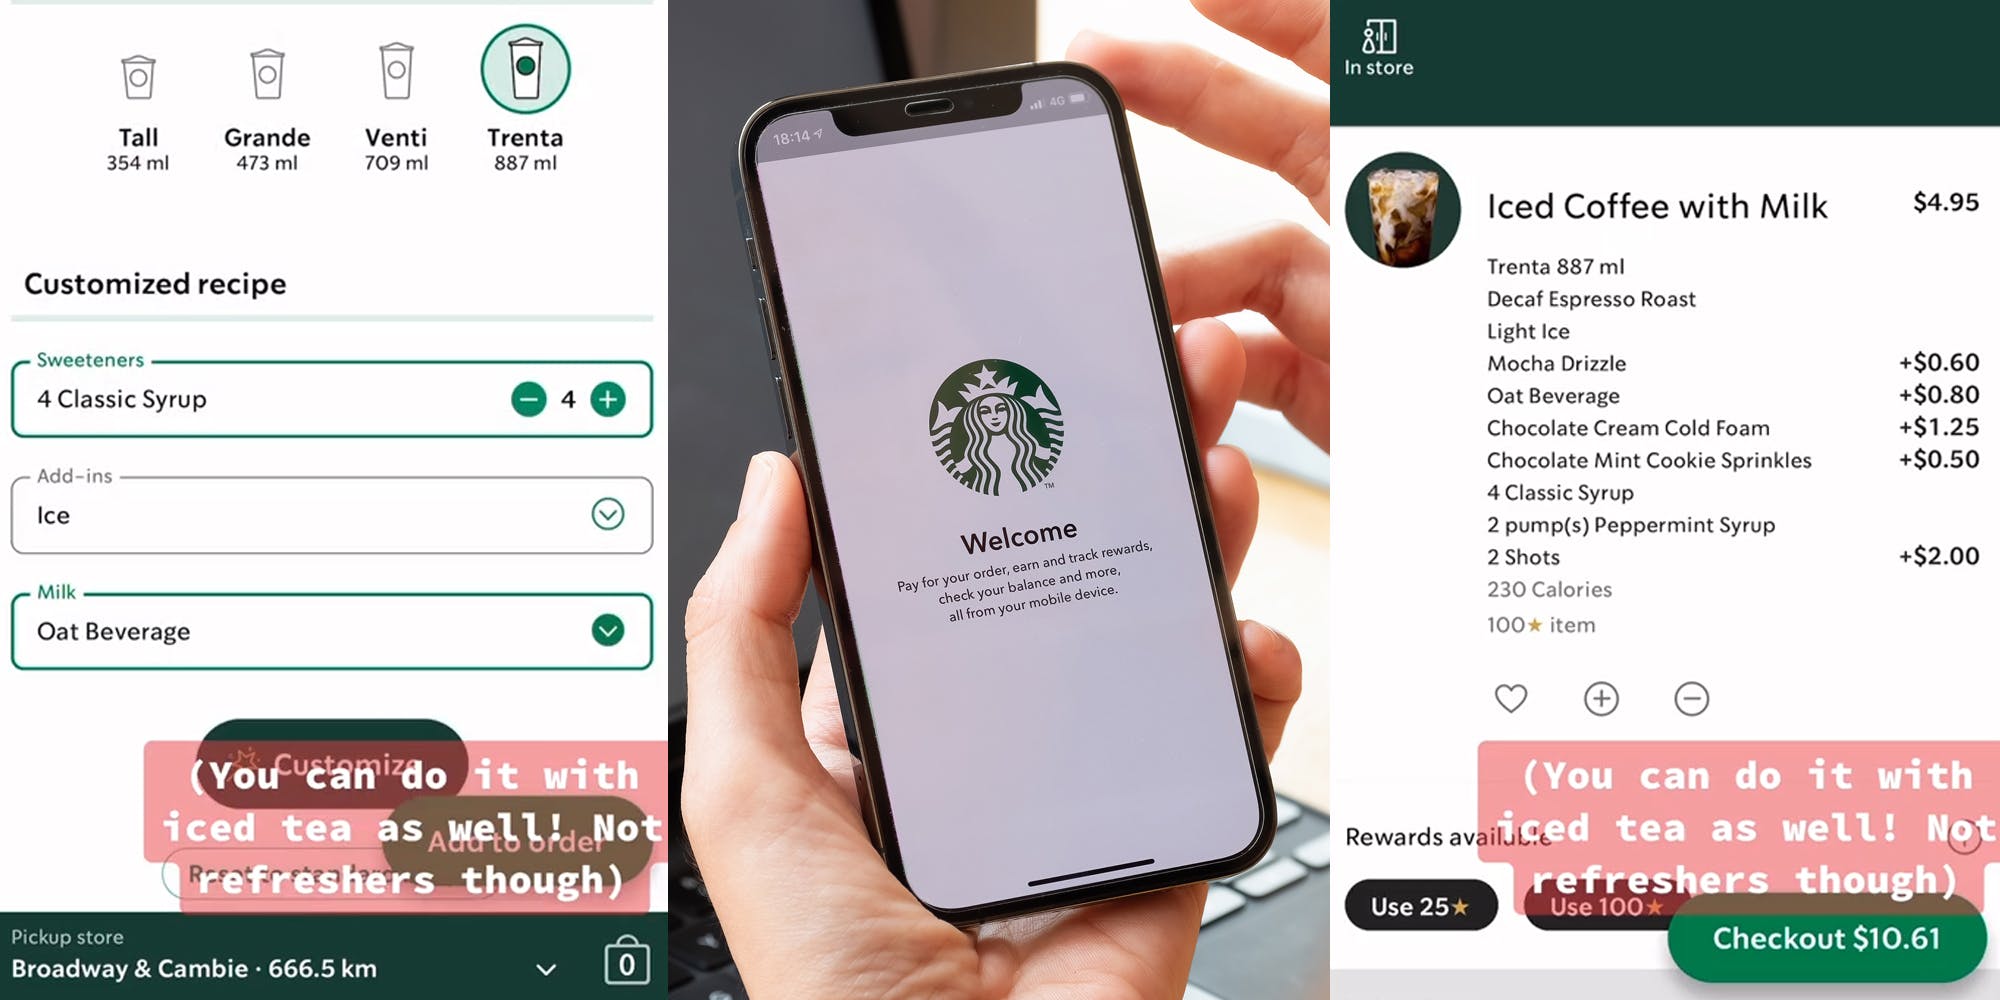 ‘Get double the drinks’: Starbucks customer shares hack for getting drink valued at 200 stars for only 100 stars